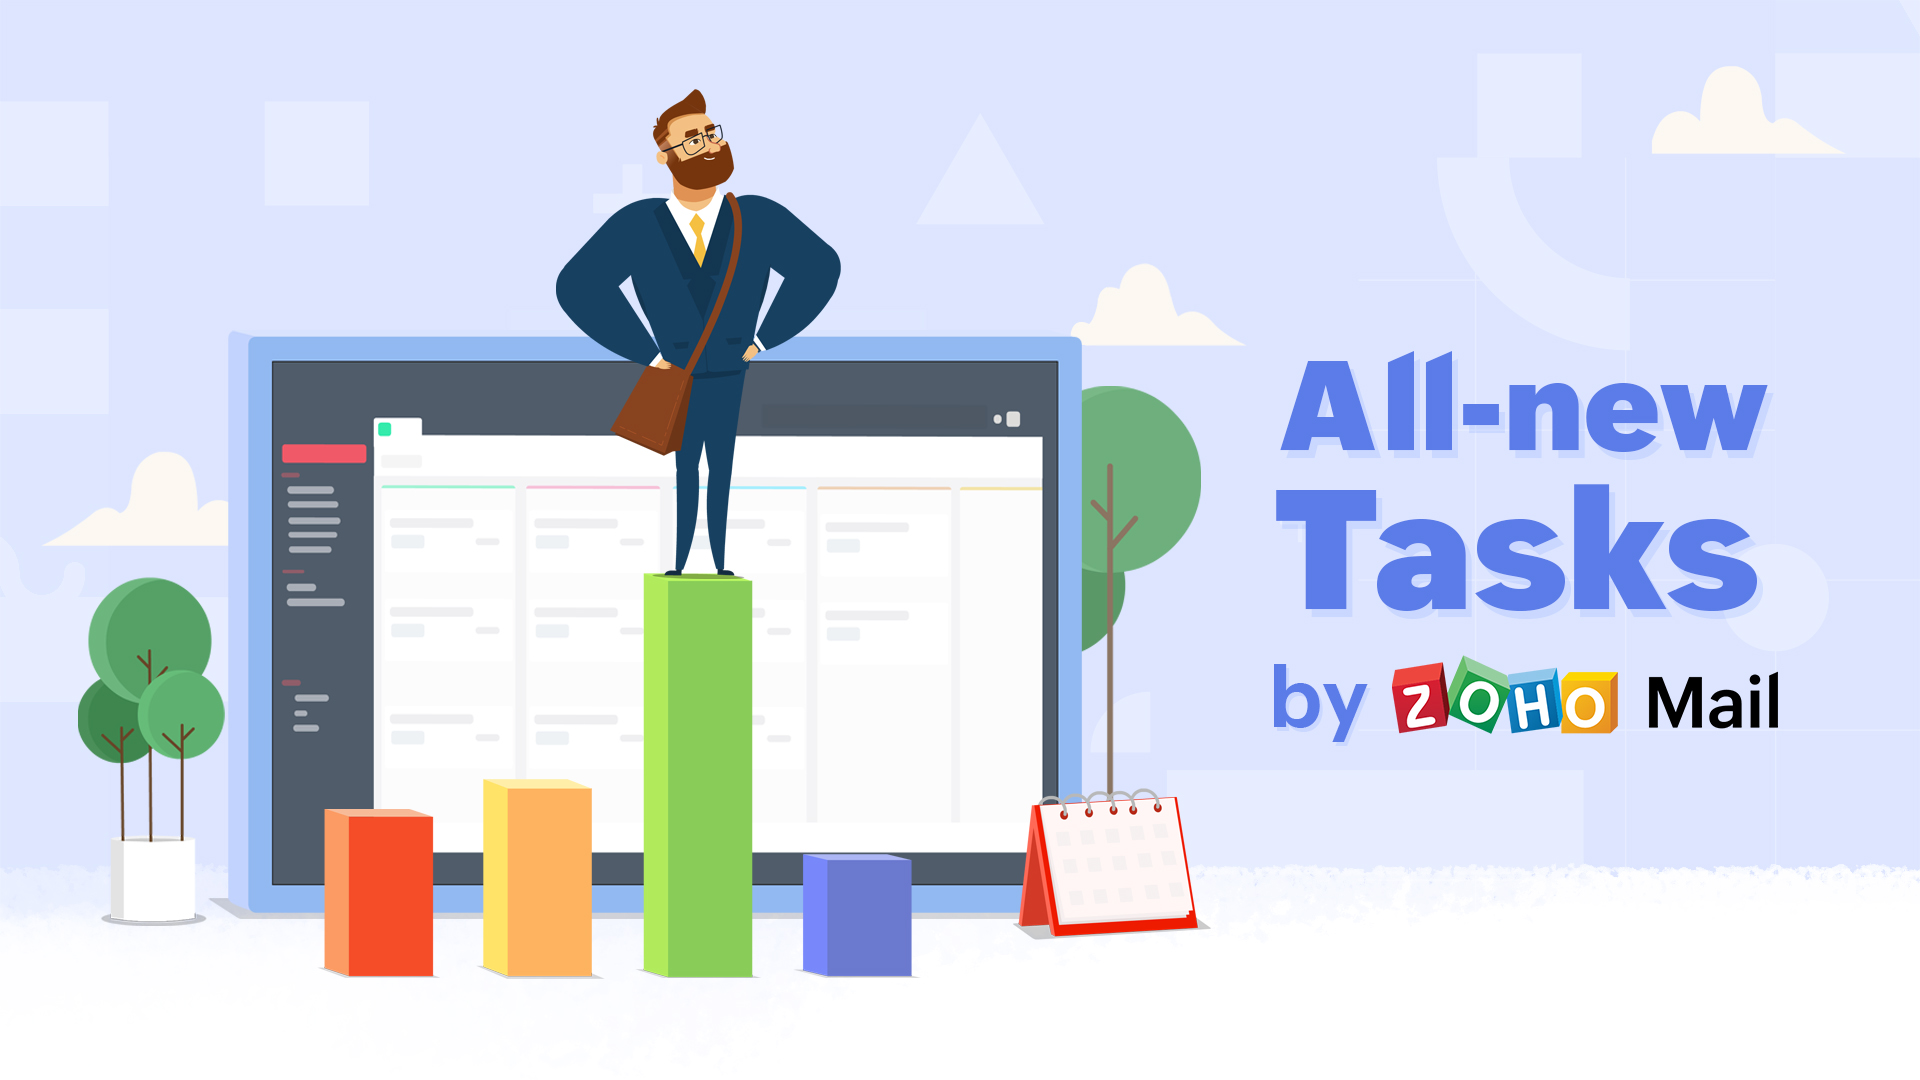 The all-new Tasks by Zoho Mail: For an enhanced and evolved workspace